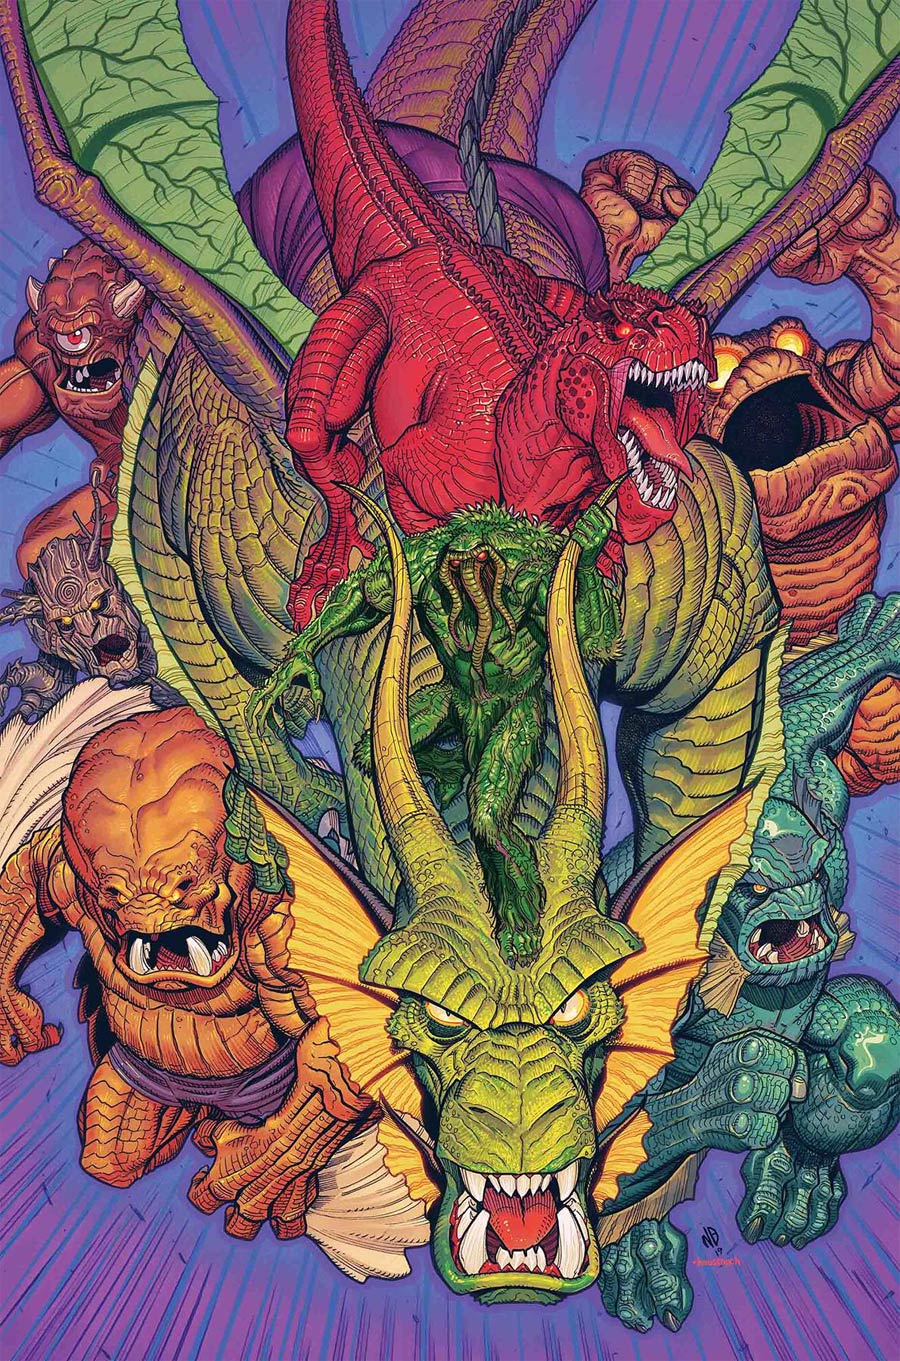 Marvel Monsters #1 By Nick Bradshaw Poster